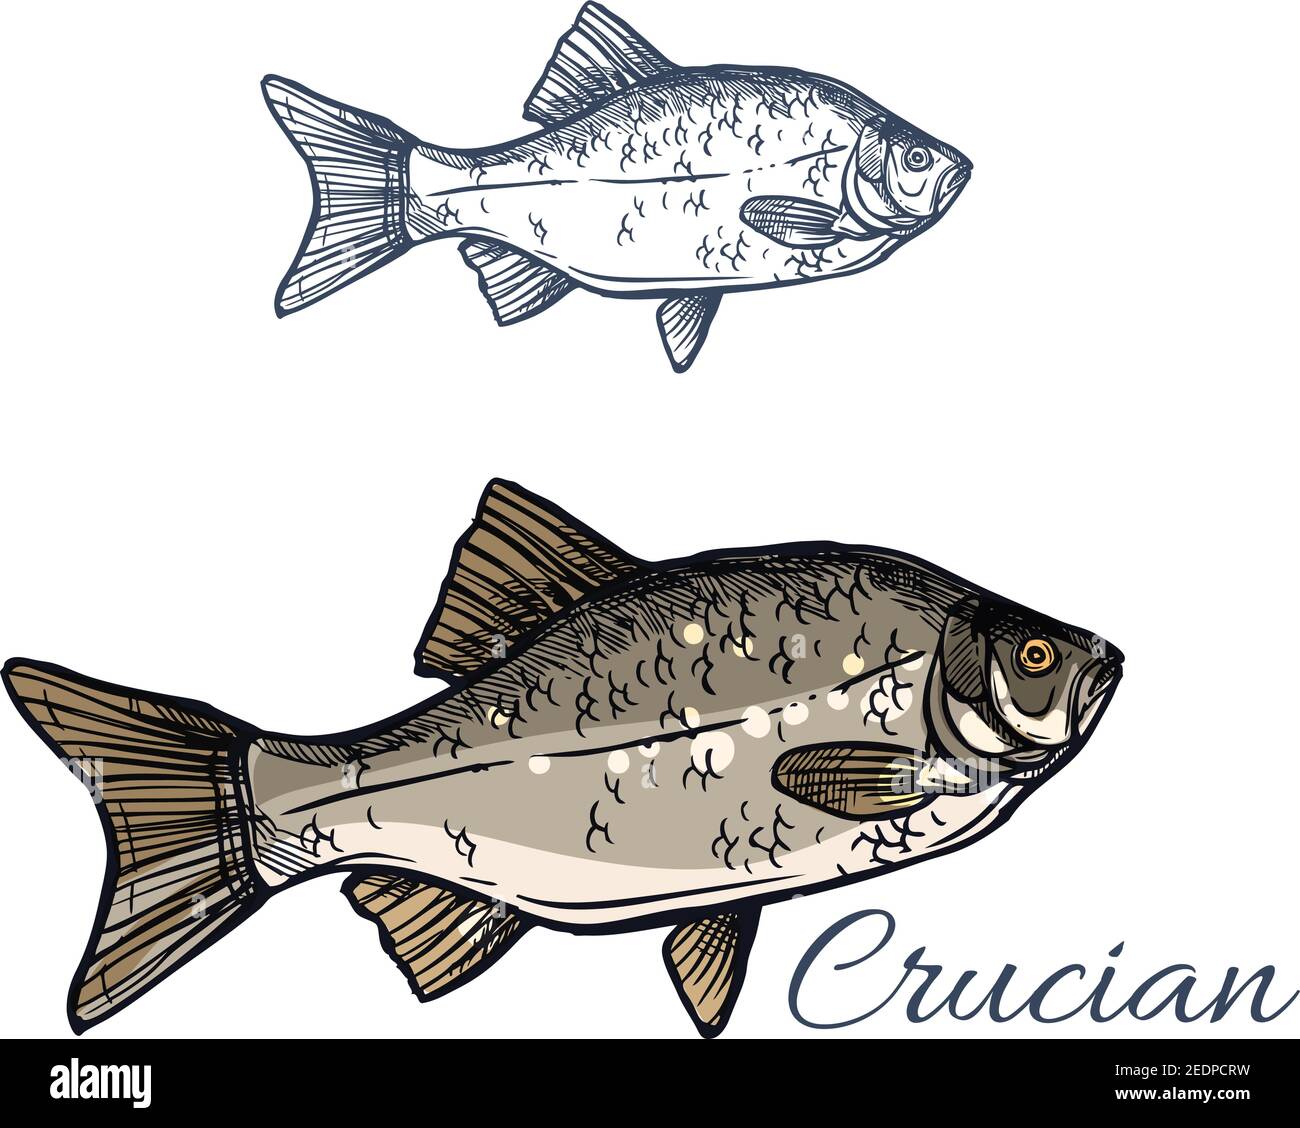 Crucian sketch vector fish icon. Isolated lake or river crucian carp fish species of carassius or goldfish. Isolated symbol for seafood restaurant sig Stock Vector